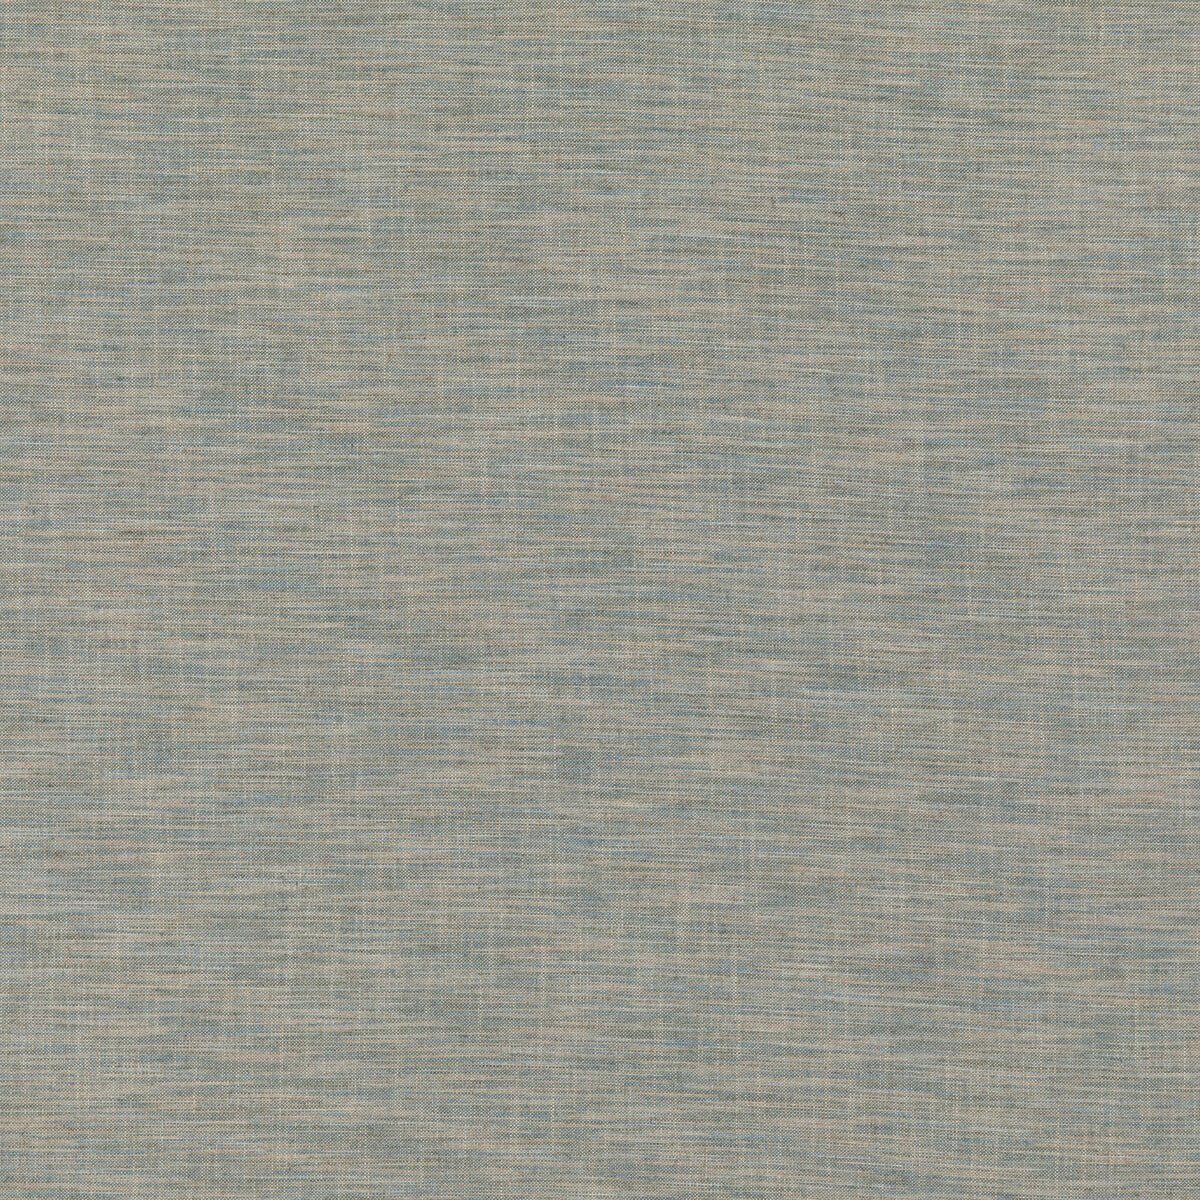 Quinton fabric in blue color - pattern BF10887.660.0 - by G P &amp; J Baker in the Essential Colours II collection